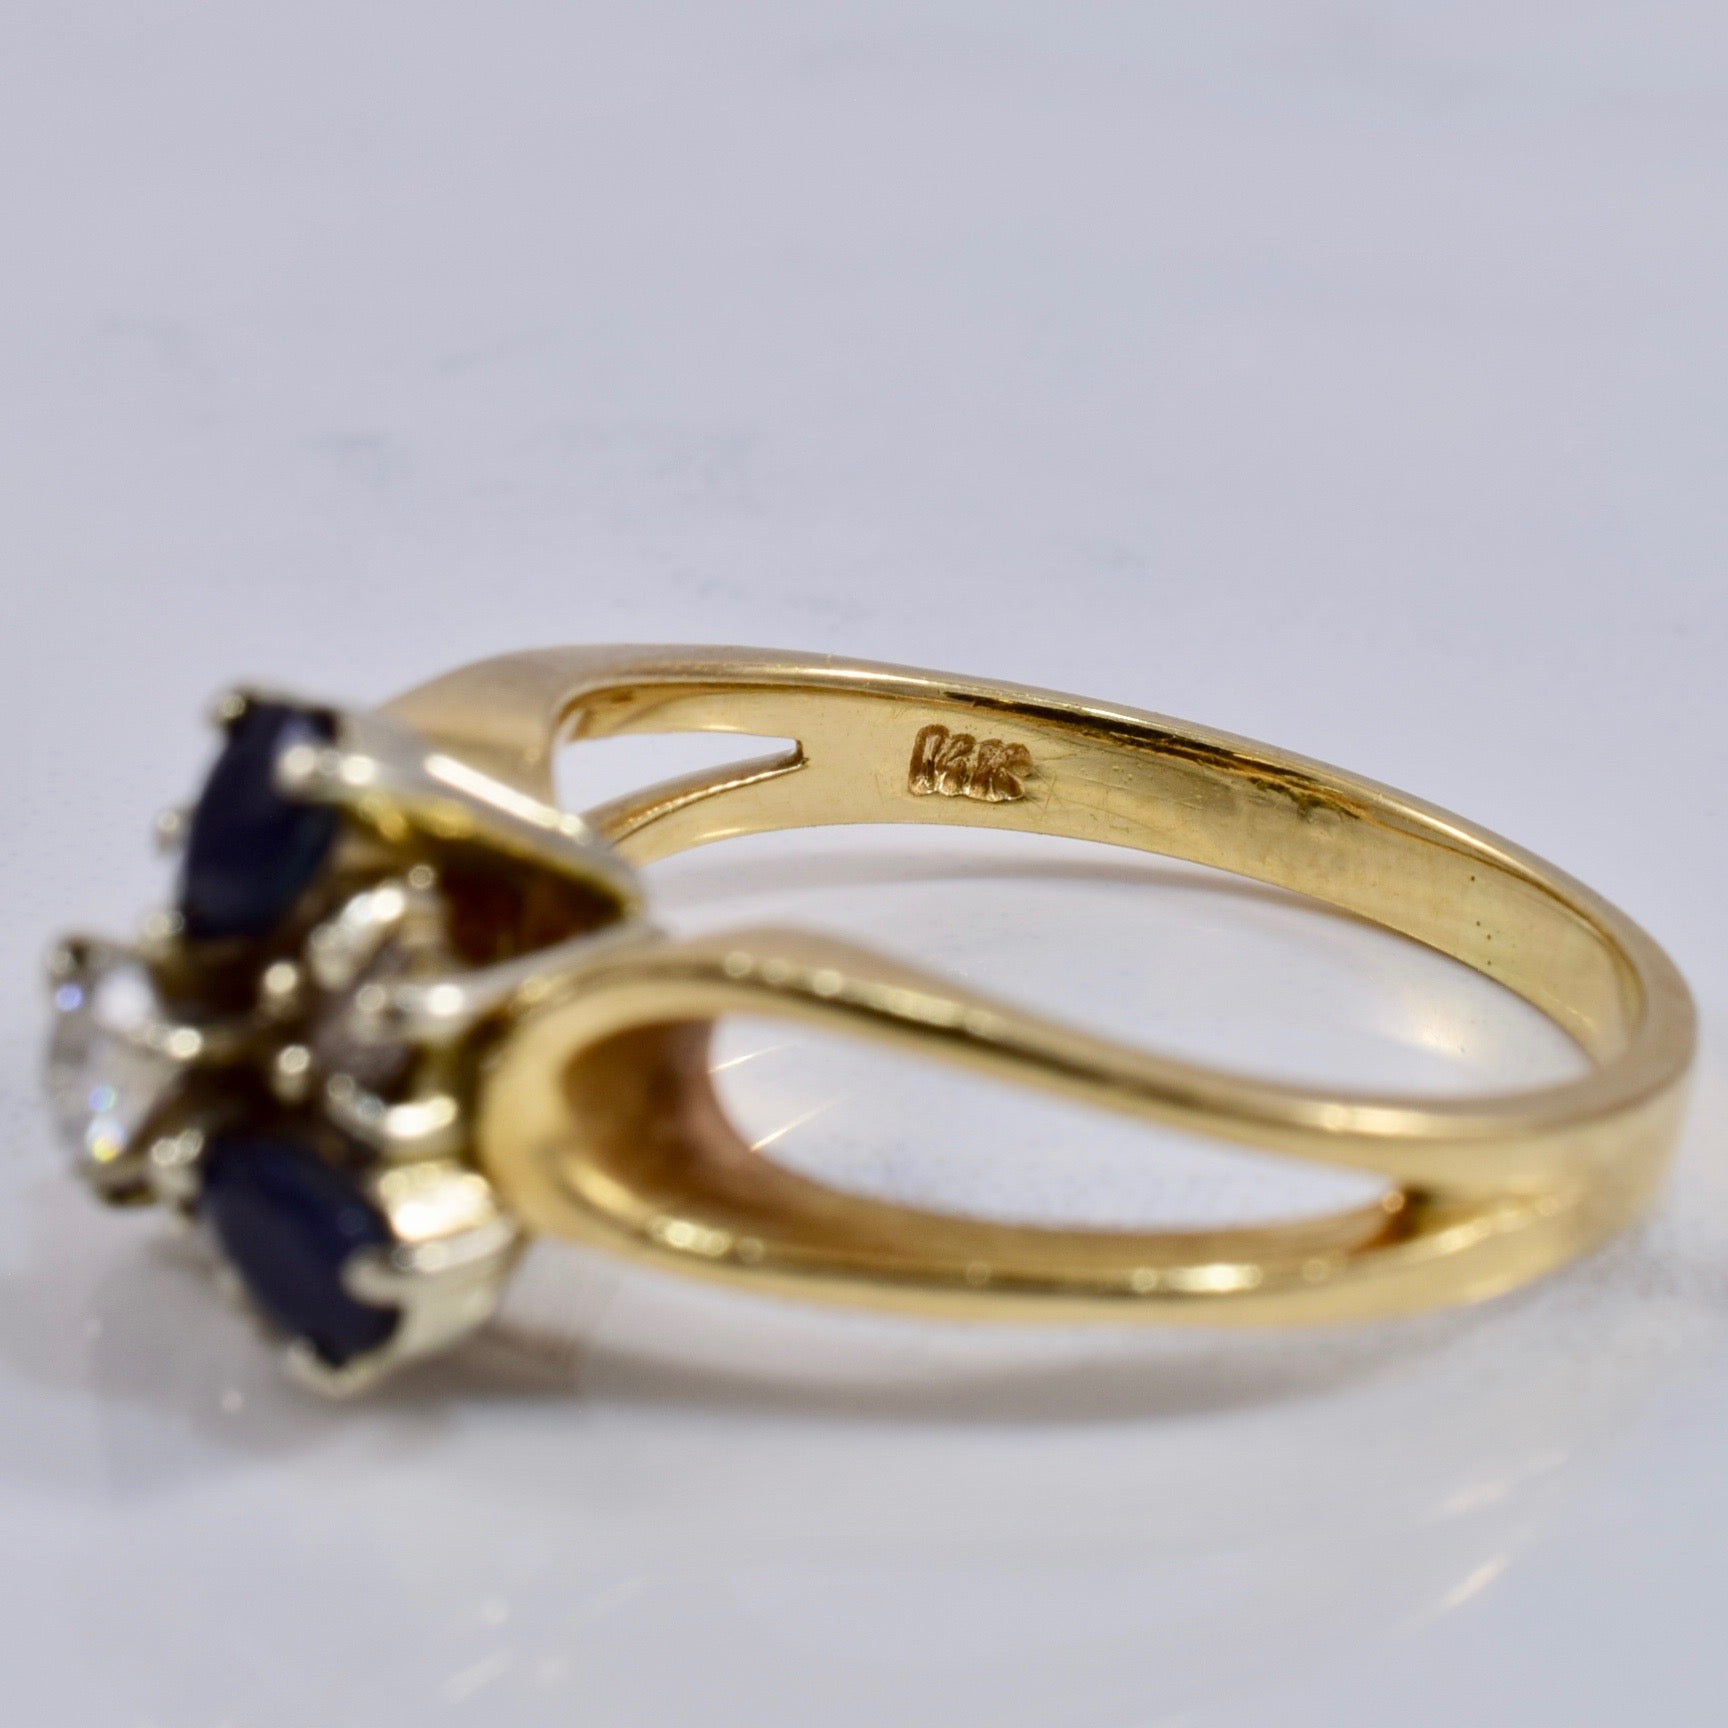 Diamond and Sapphire Cluster Ring | 0.22 ctw SZ 7.5 |